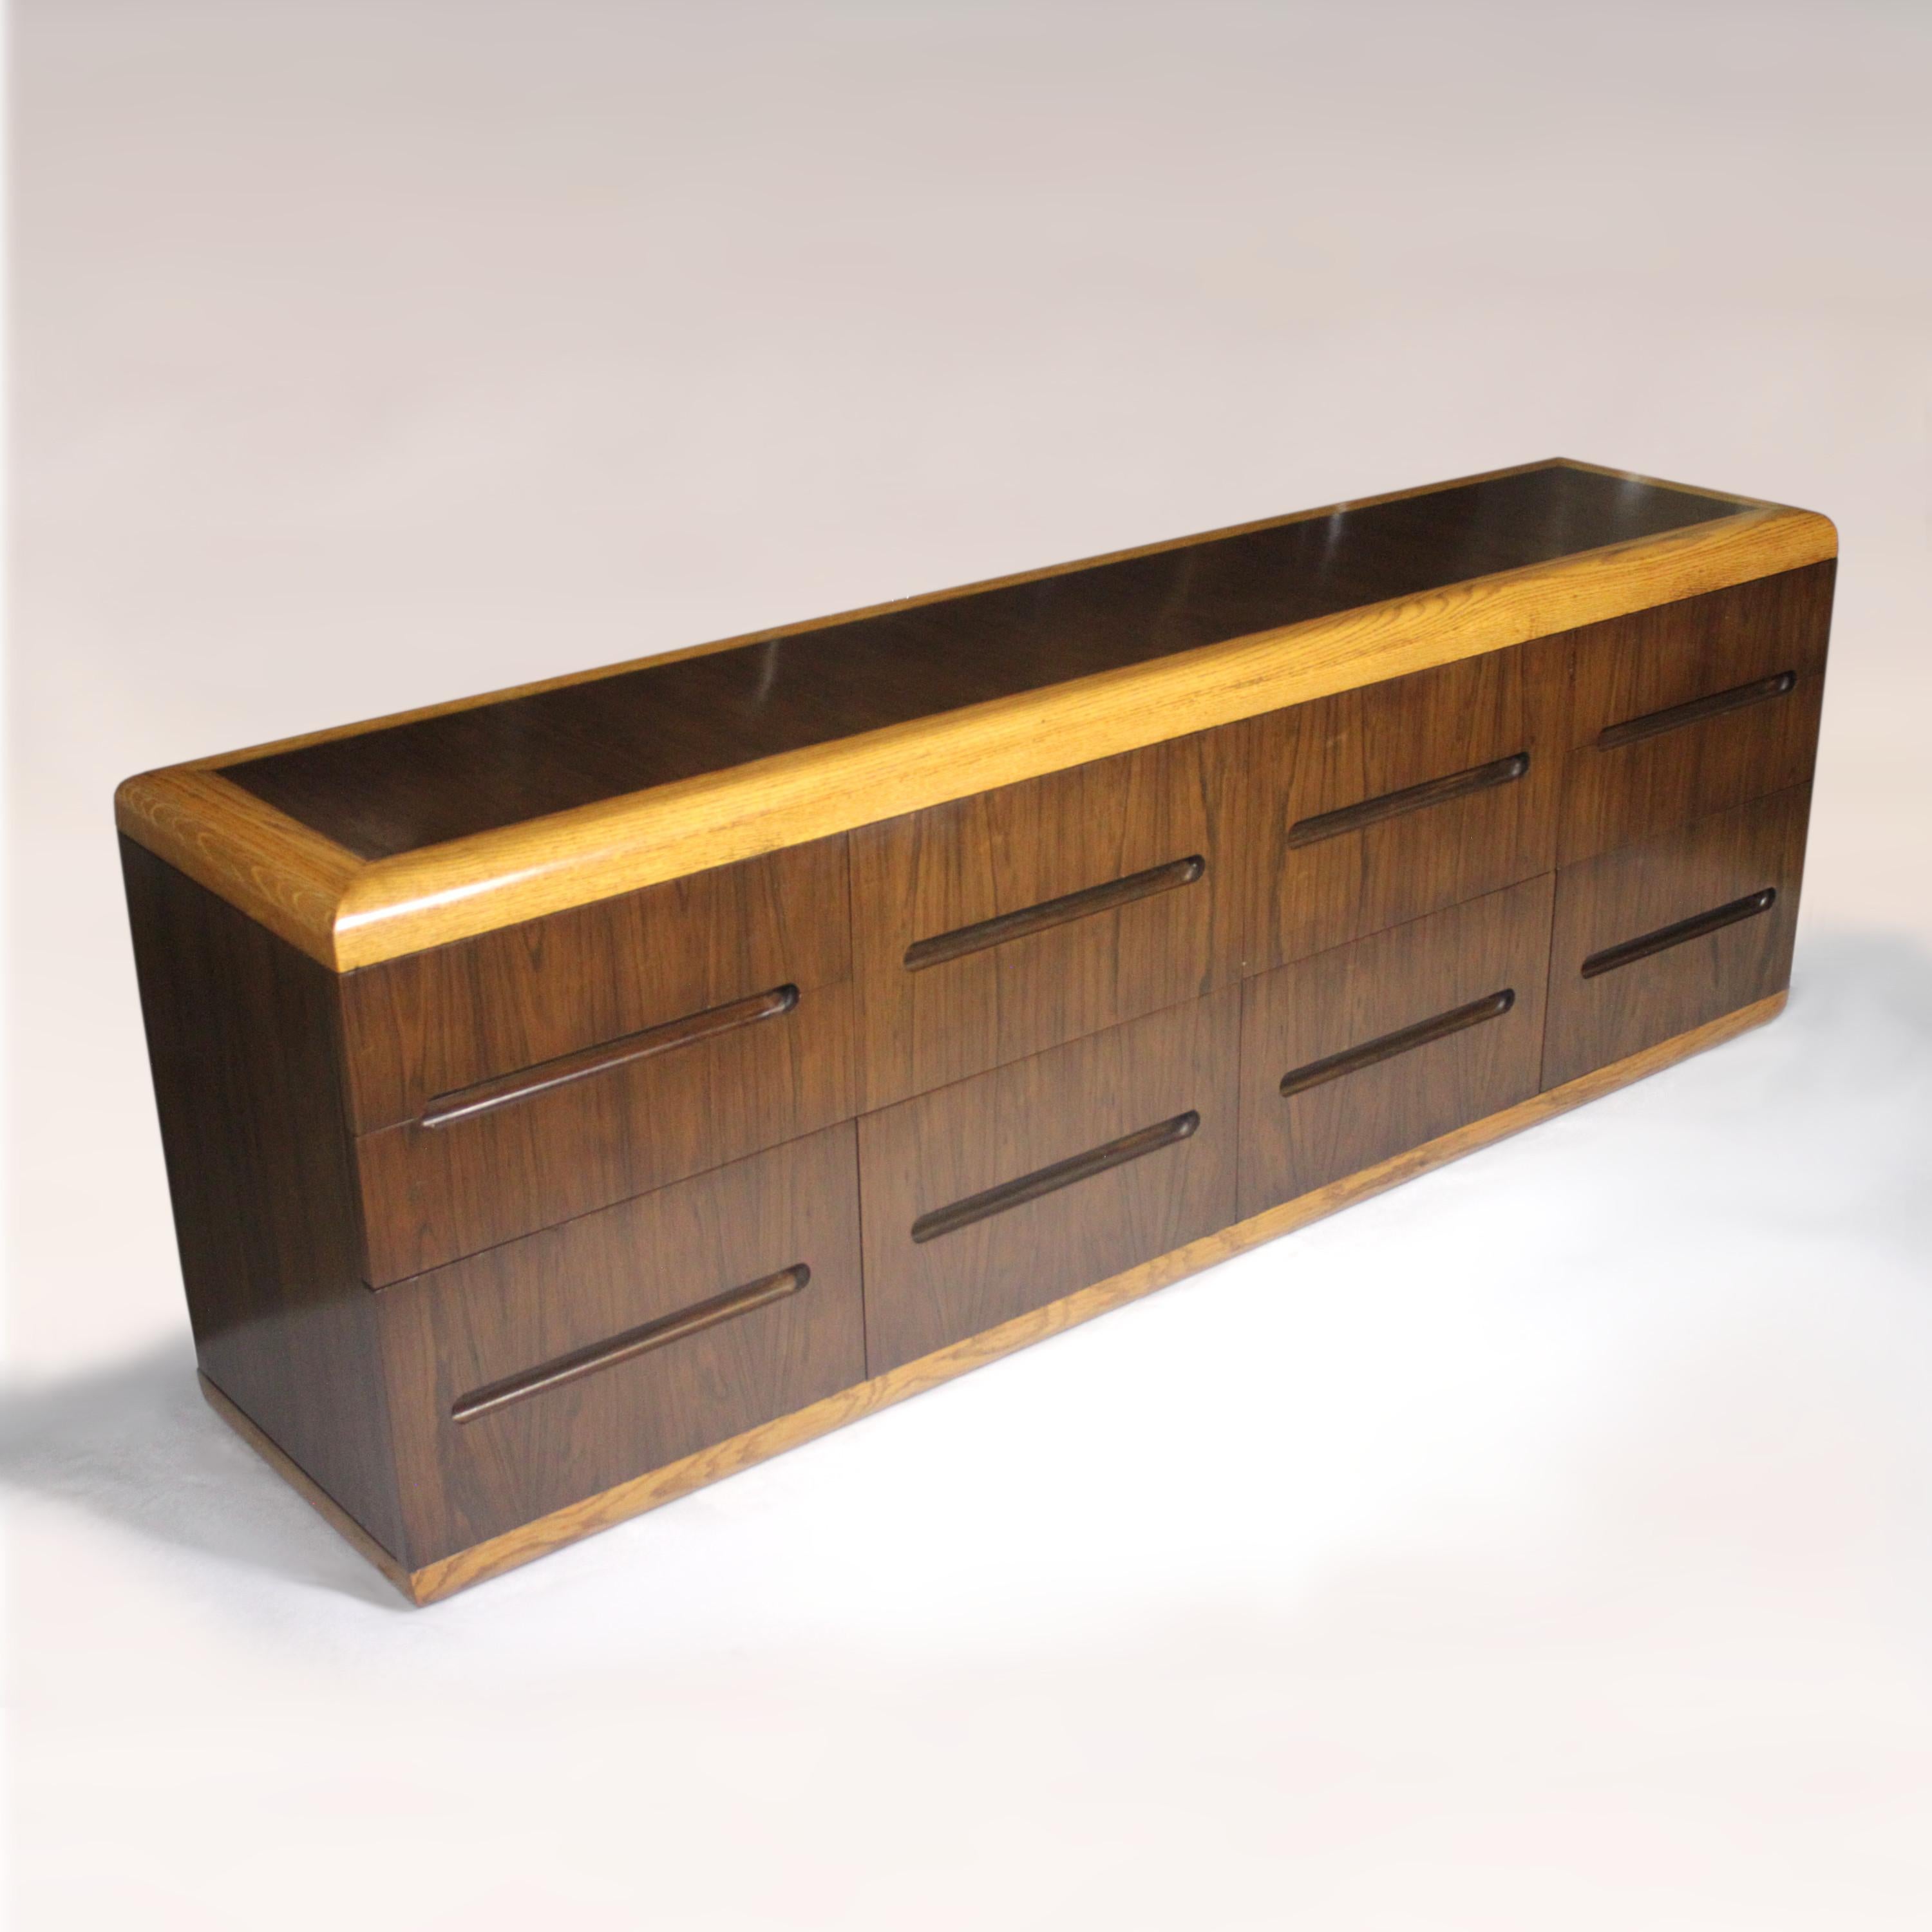 American Vintage 1970s Mid-Century Modern Rosewood and Oak Credenza Buffet by Dunbar